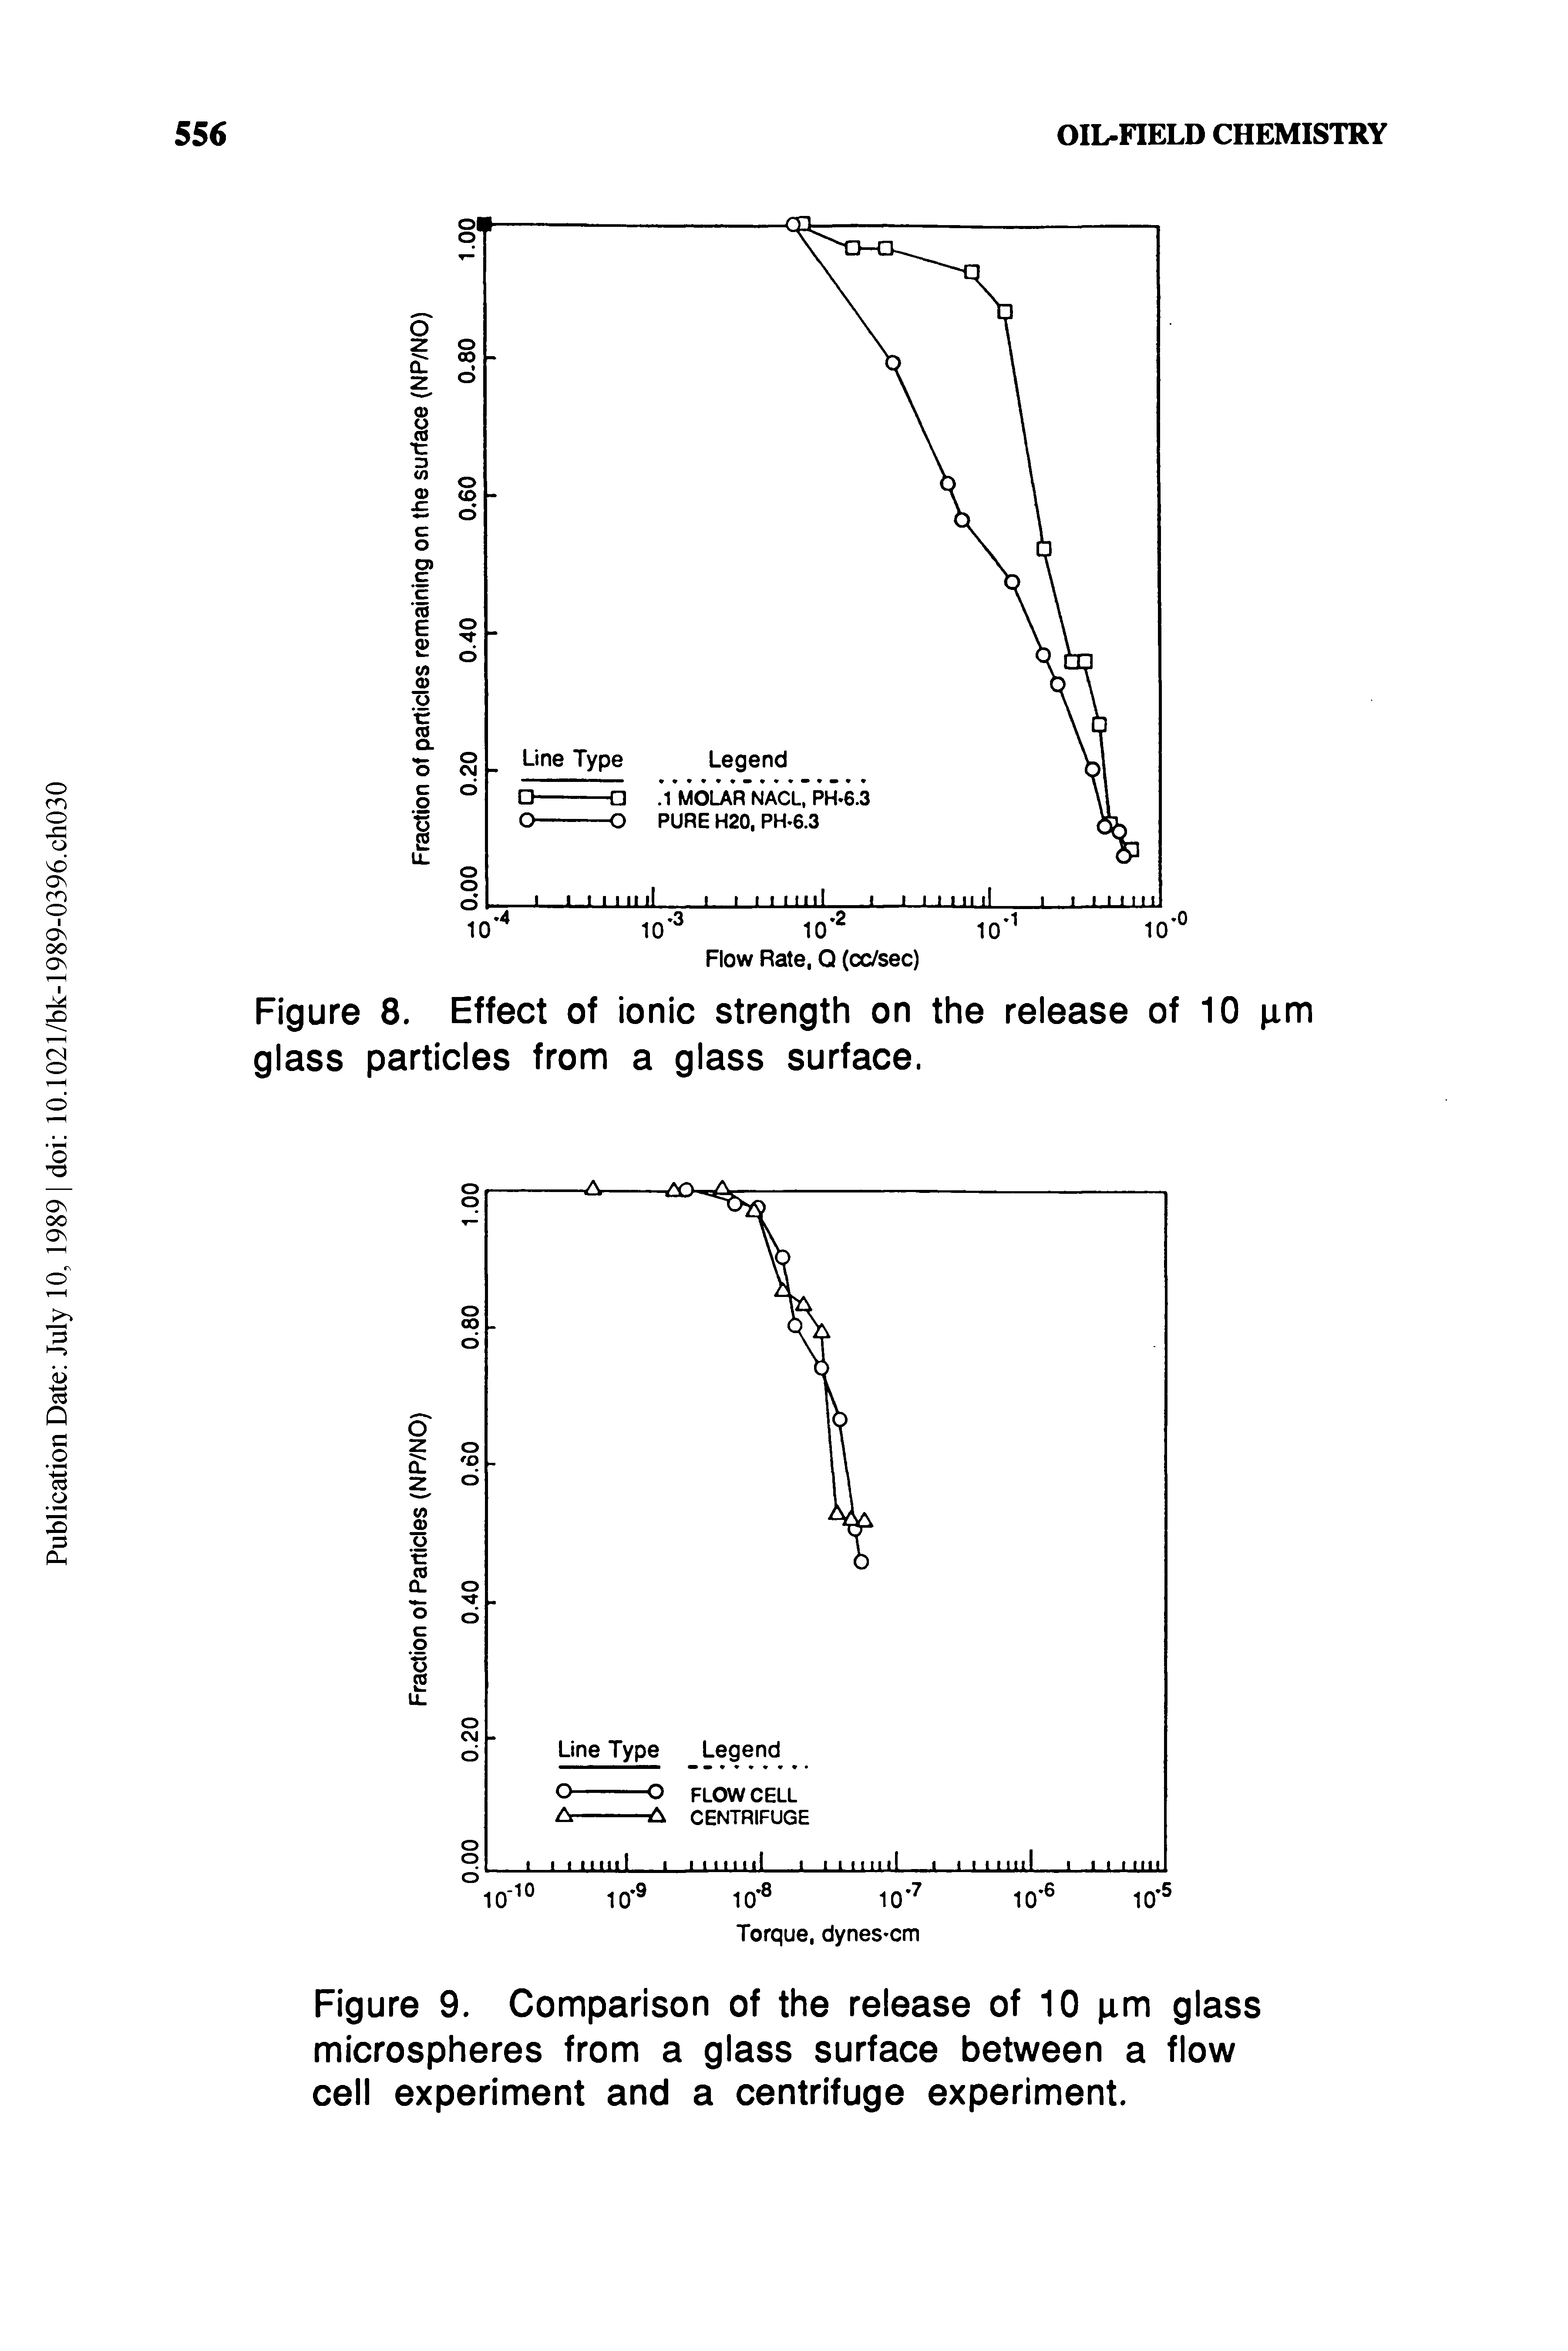 Figure 9. Comparison of the release of 10 pm glass microspheres from a glass surface between a flow cell experiment and a centrifuge experiment.